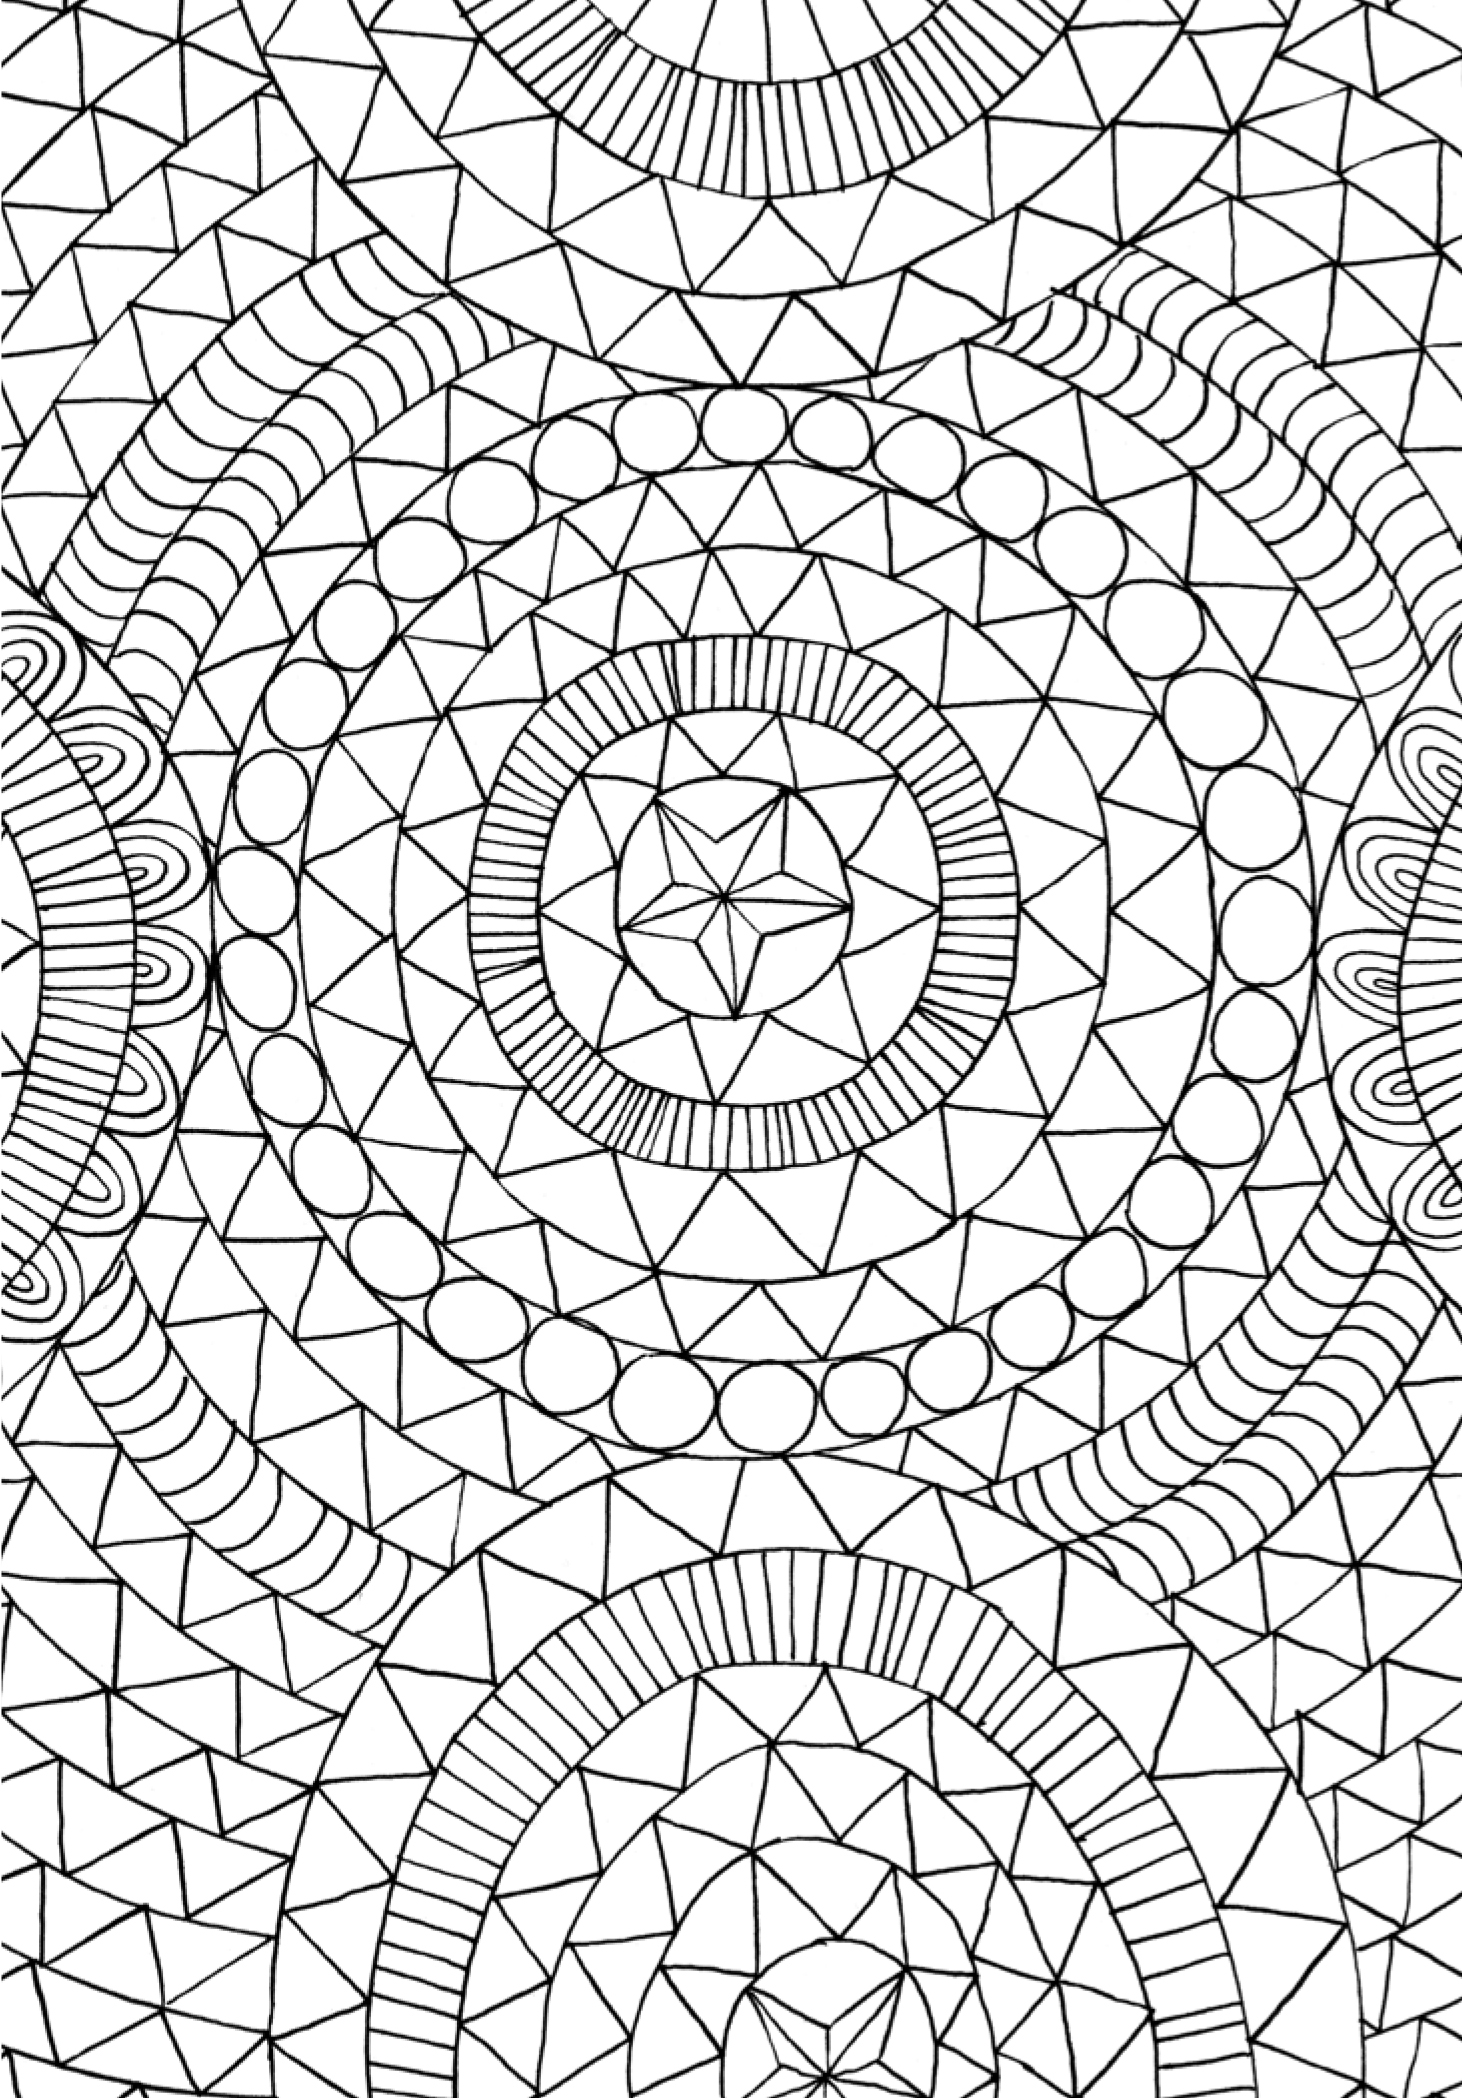 Drawing Anti stress 20 Relaxation – Printable coloring pages